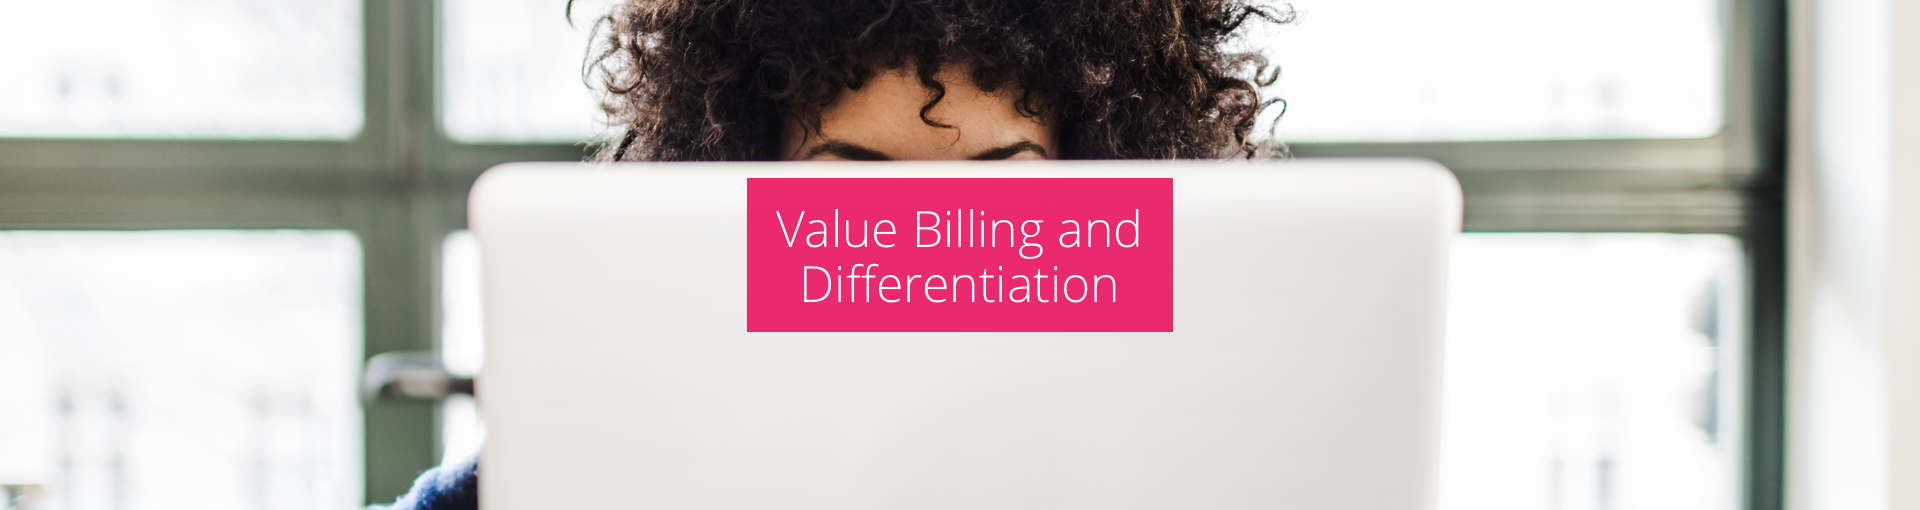 Value Billing and Differentiation Featured Image